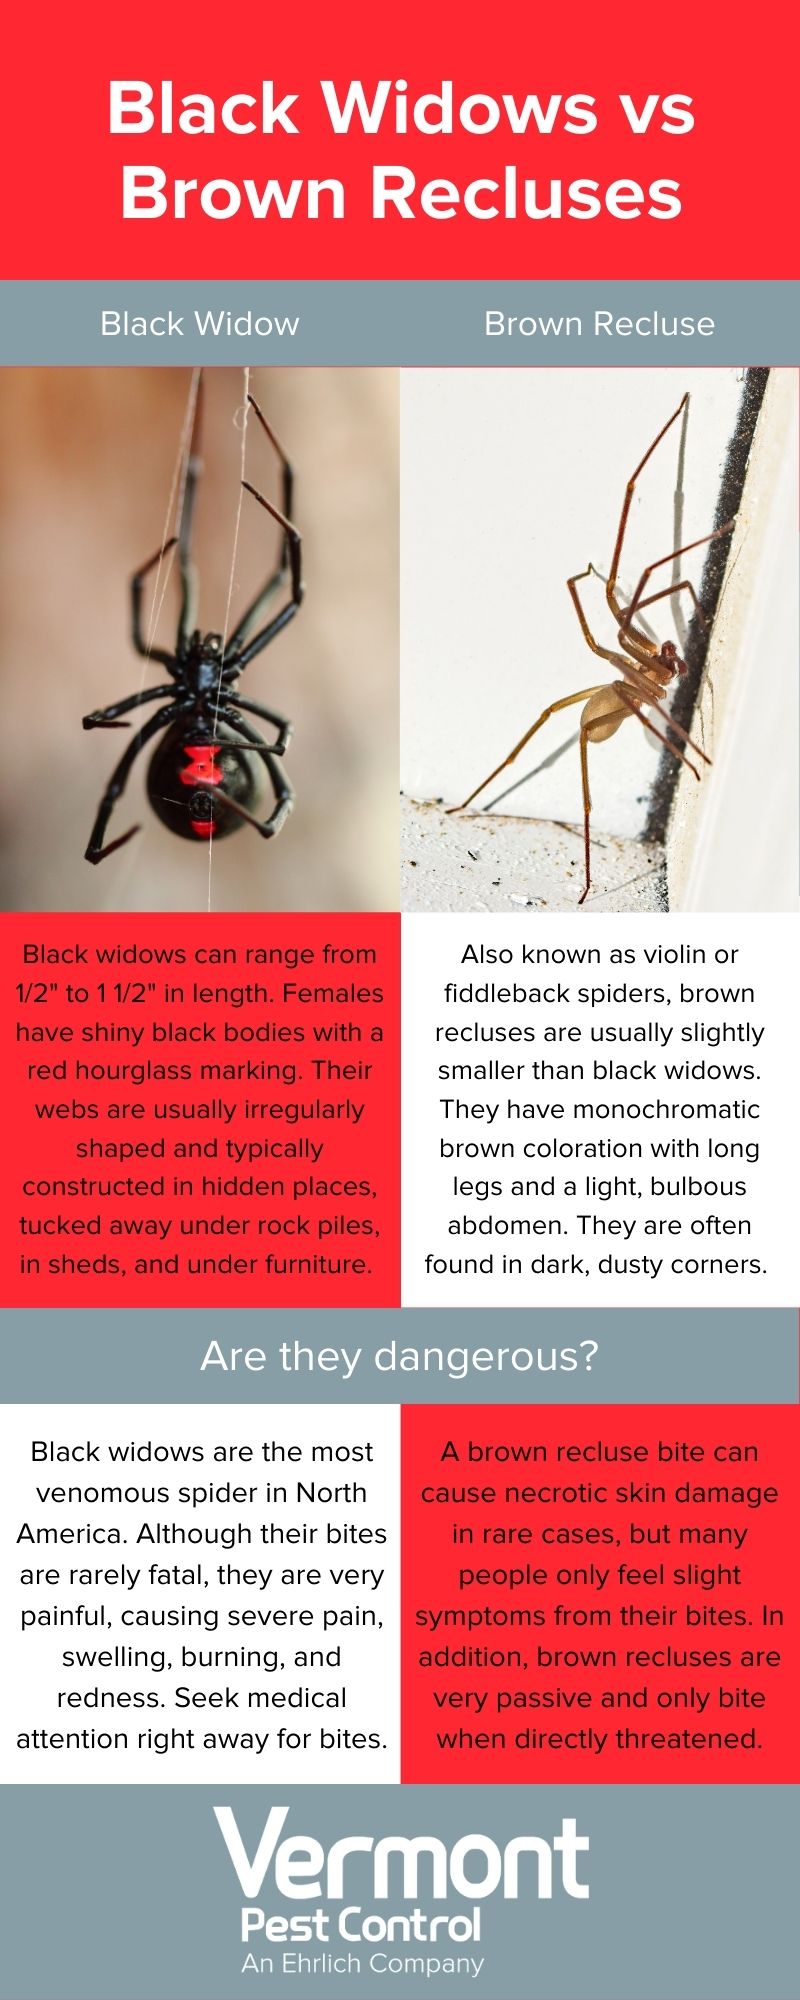 How to tell apart black widows and brown recluses in Vermont - Vermont Pest Control